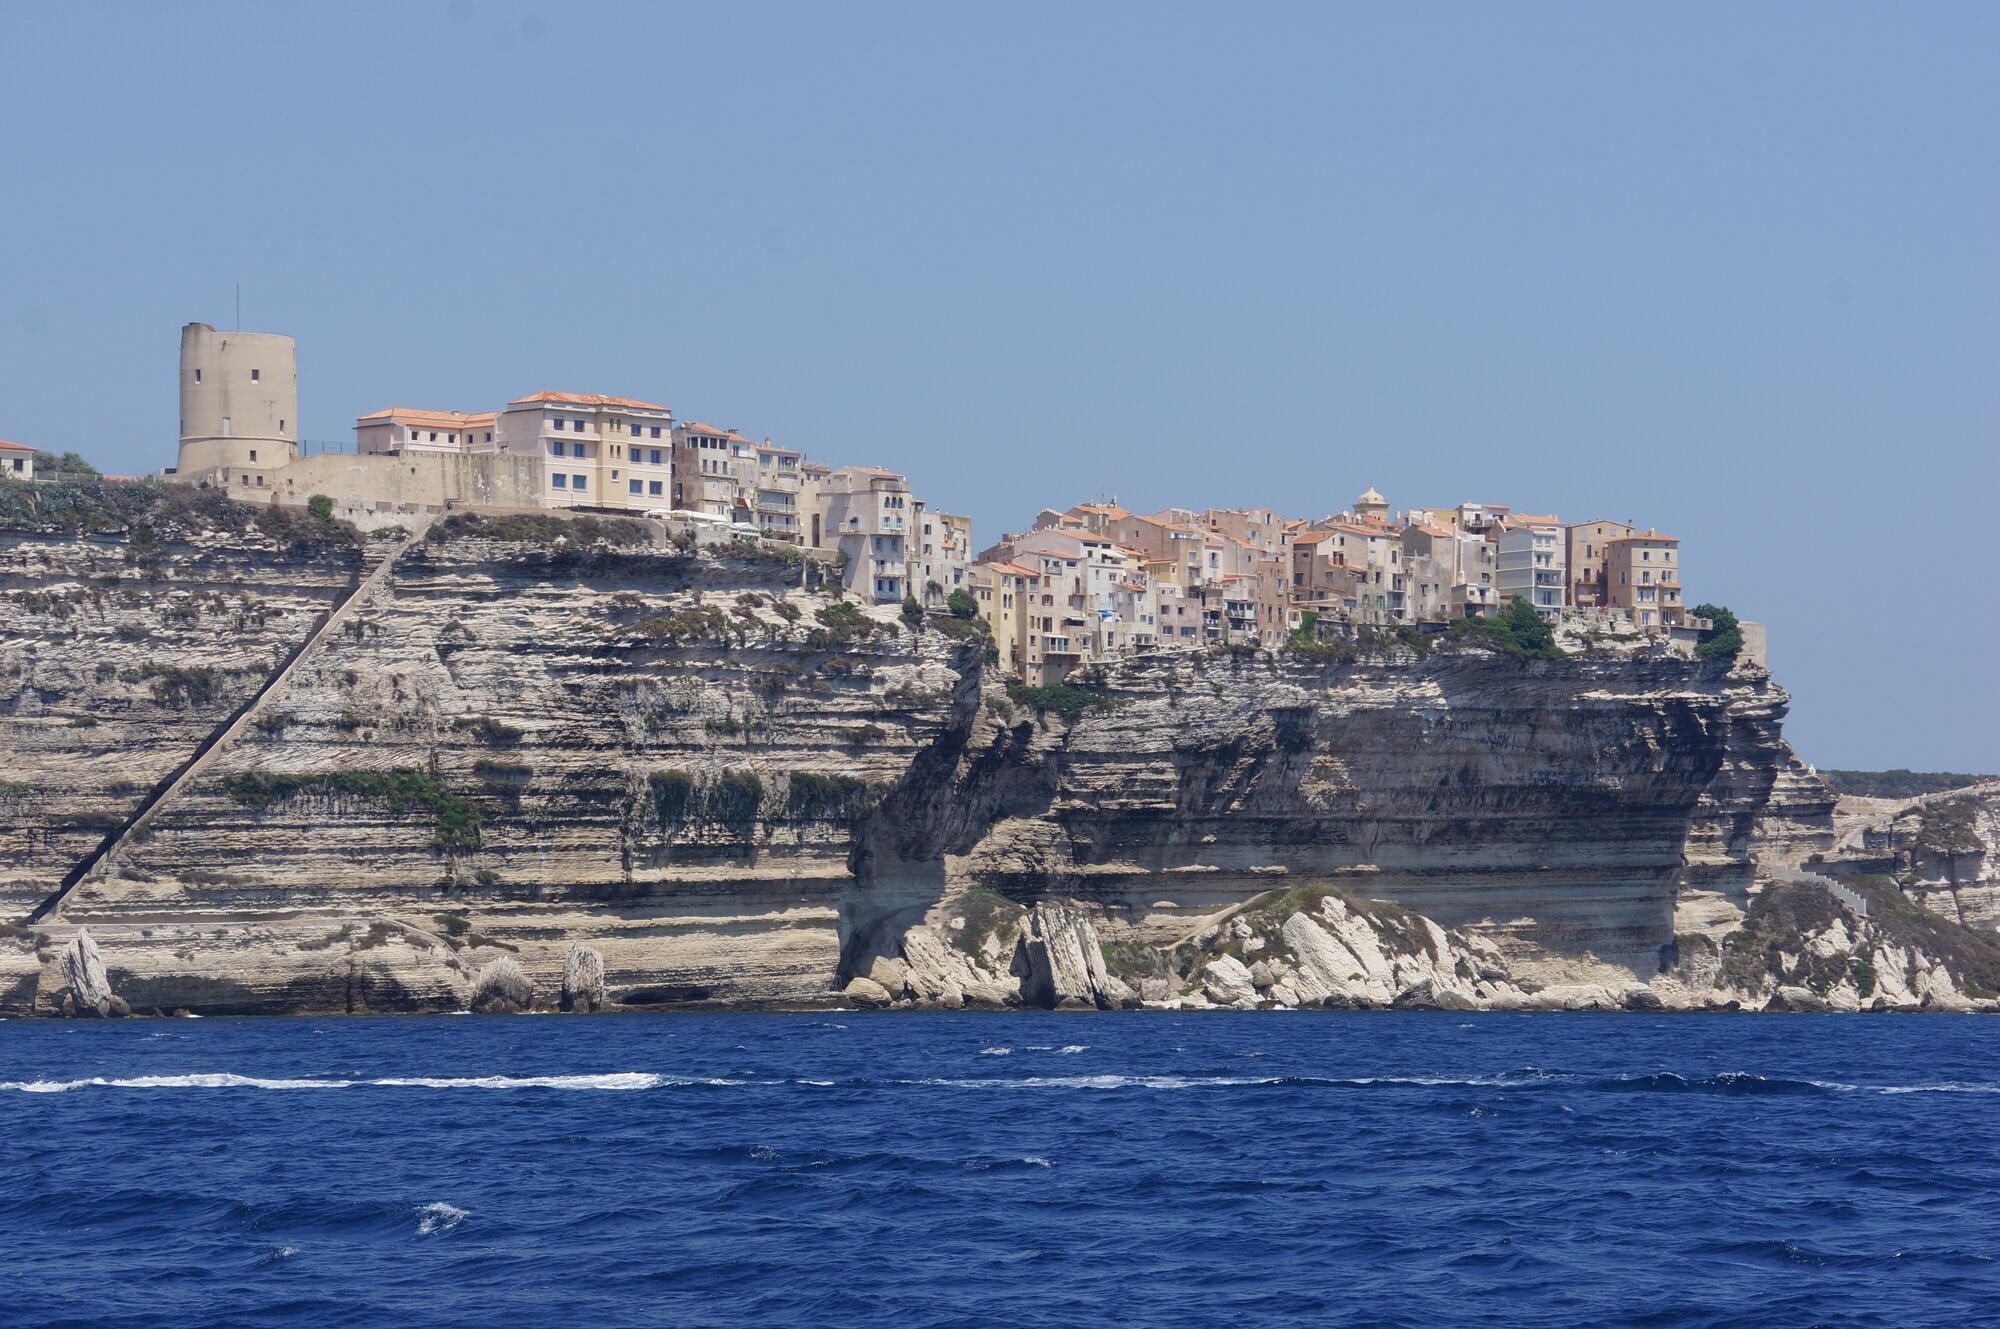 Rock cities of Europe: how does living on the edge of a precipice feel like